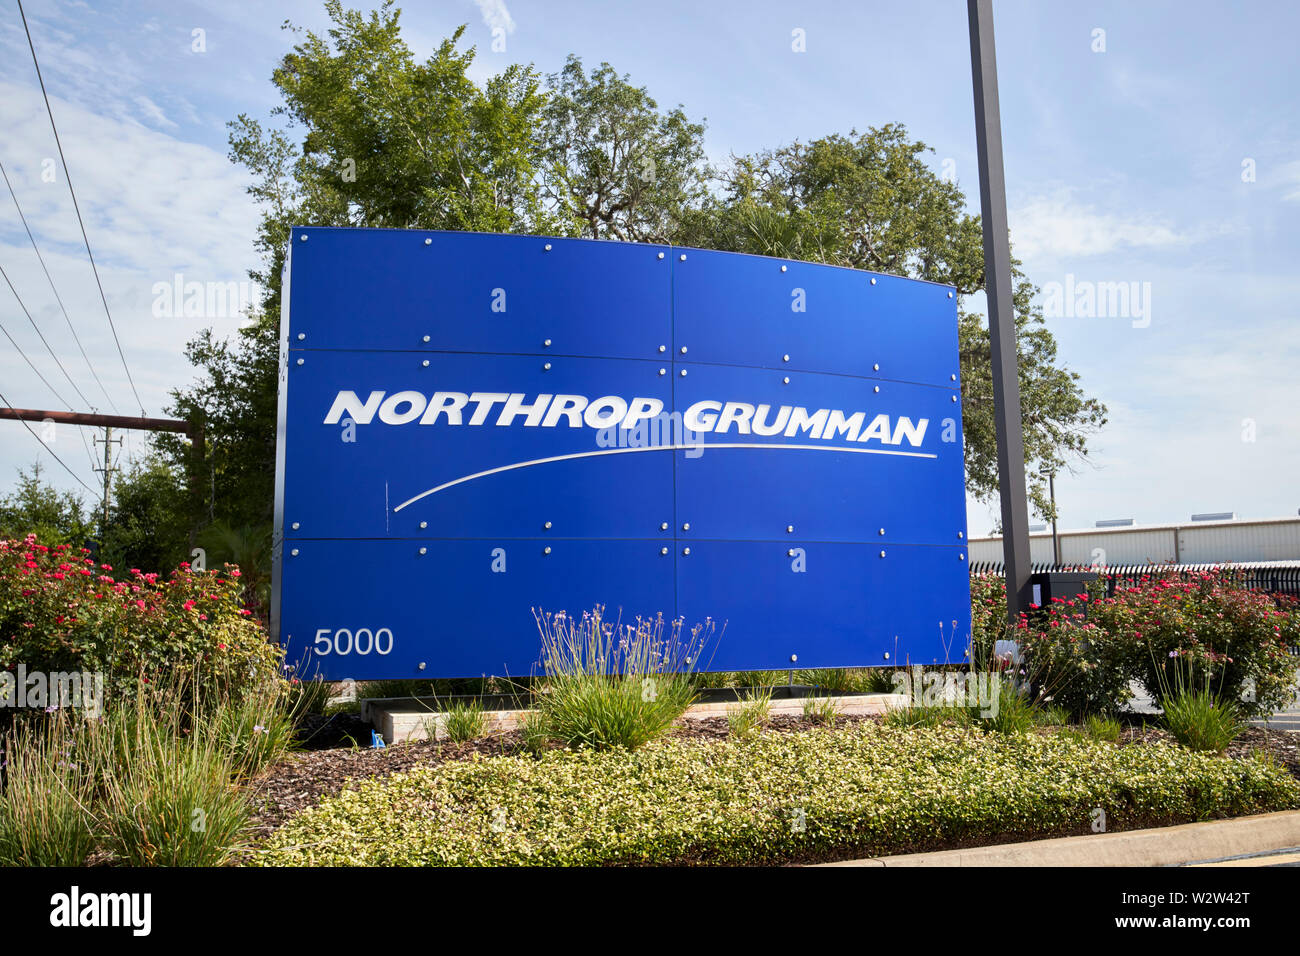 Northrop Grumman logo outside St Augustine facility Florida USA United States of America The site produces the E-2D hawkeye early warning aircraft Stock Photo